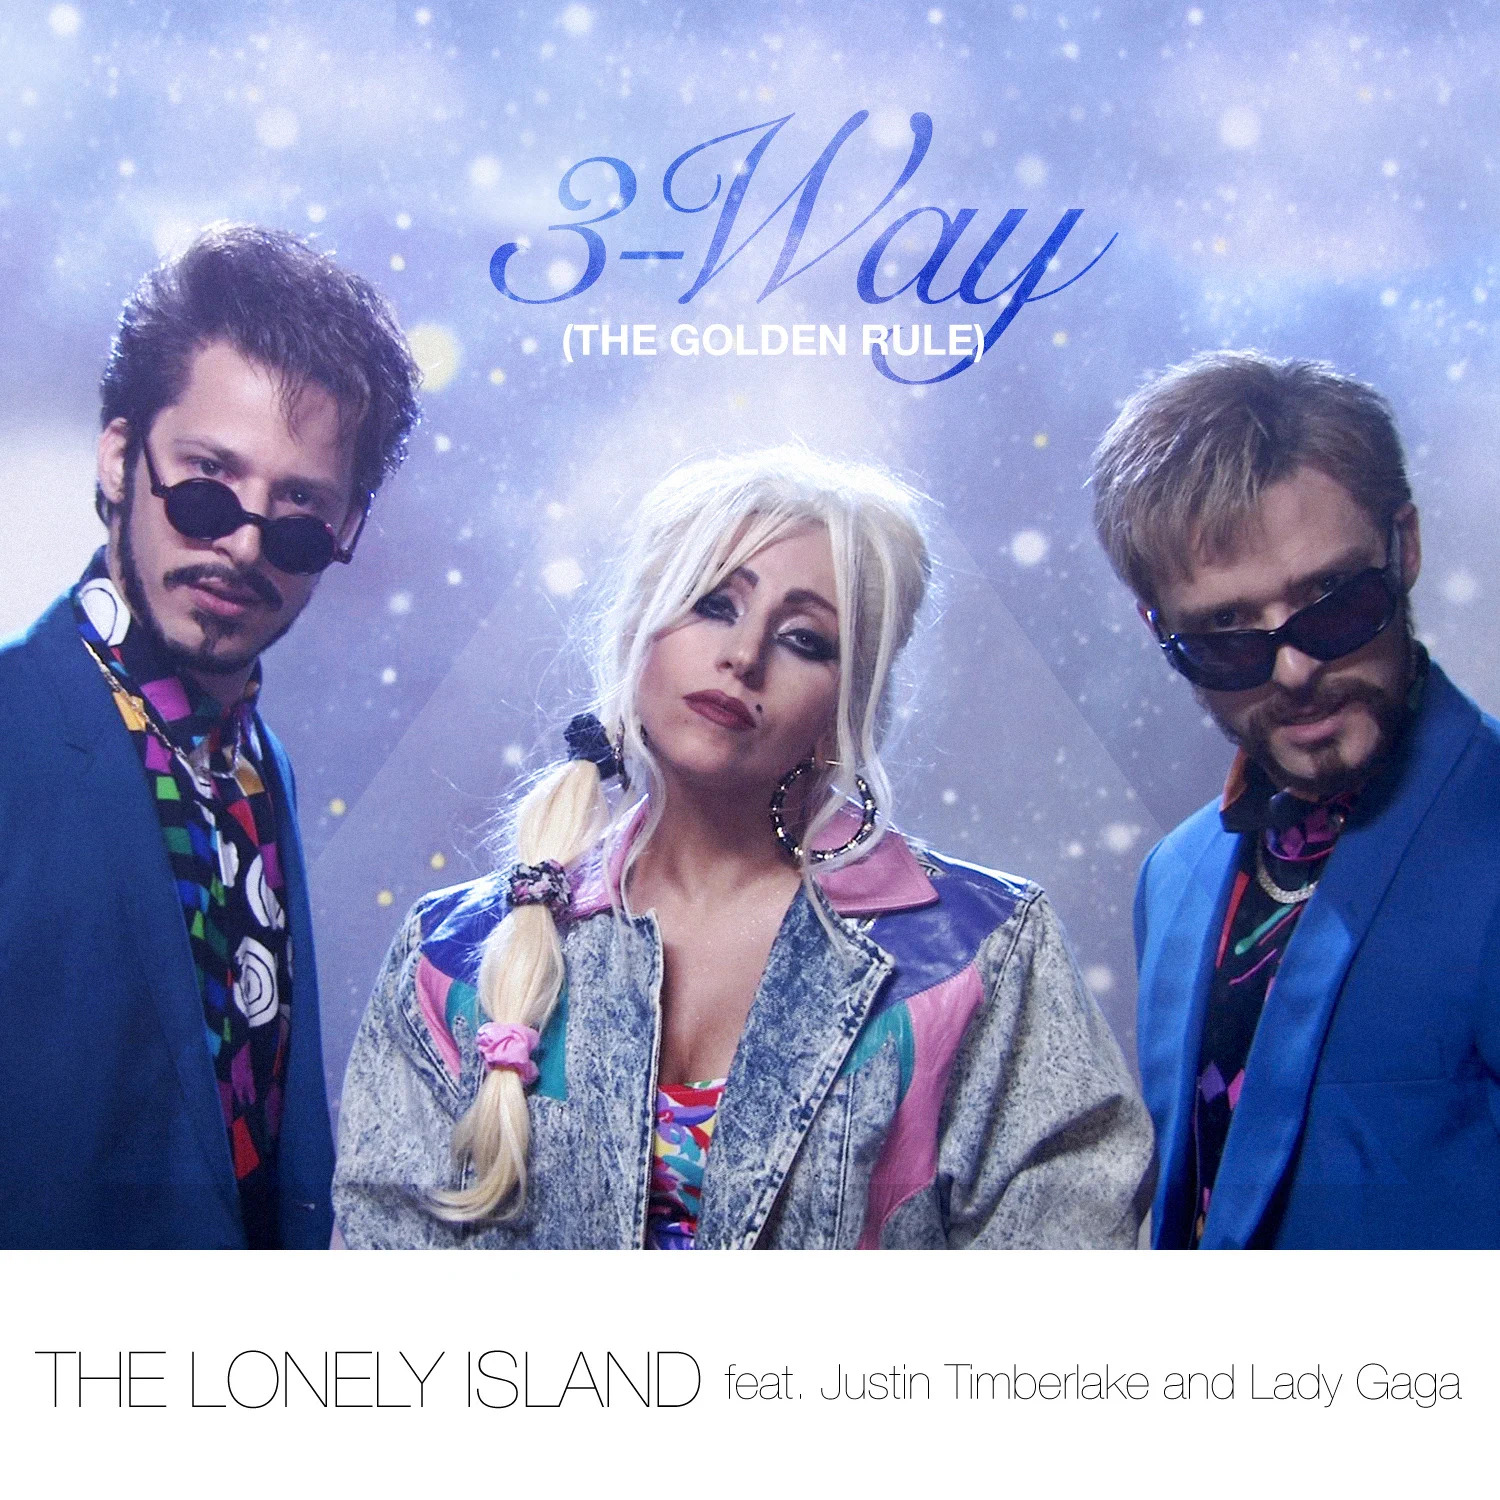 The Lonely Island ft. featuring Justin Timberlake & Lady Gaga 3-Way (The Golden Rule) cover artwork